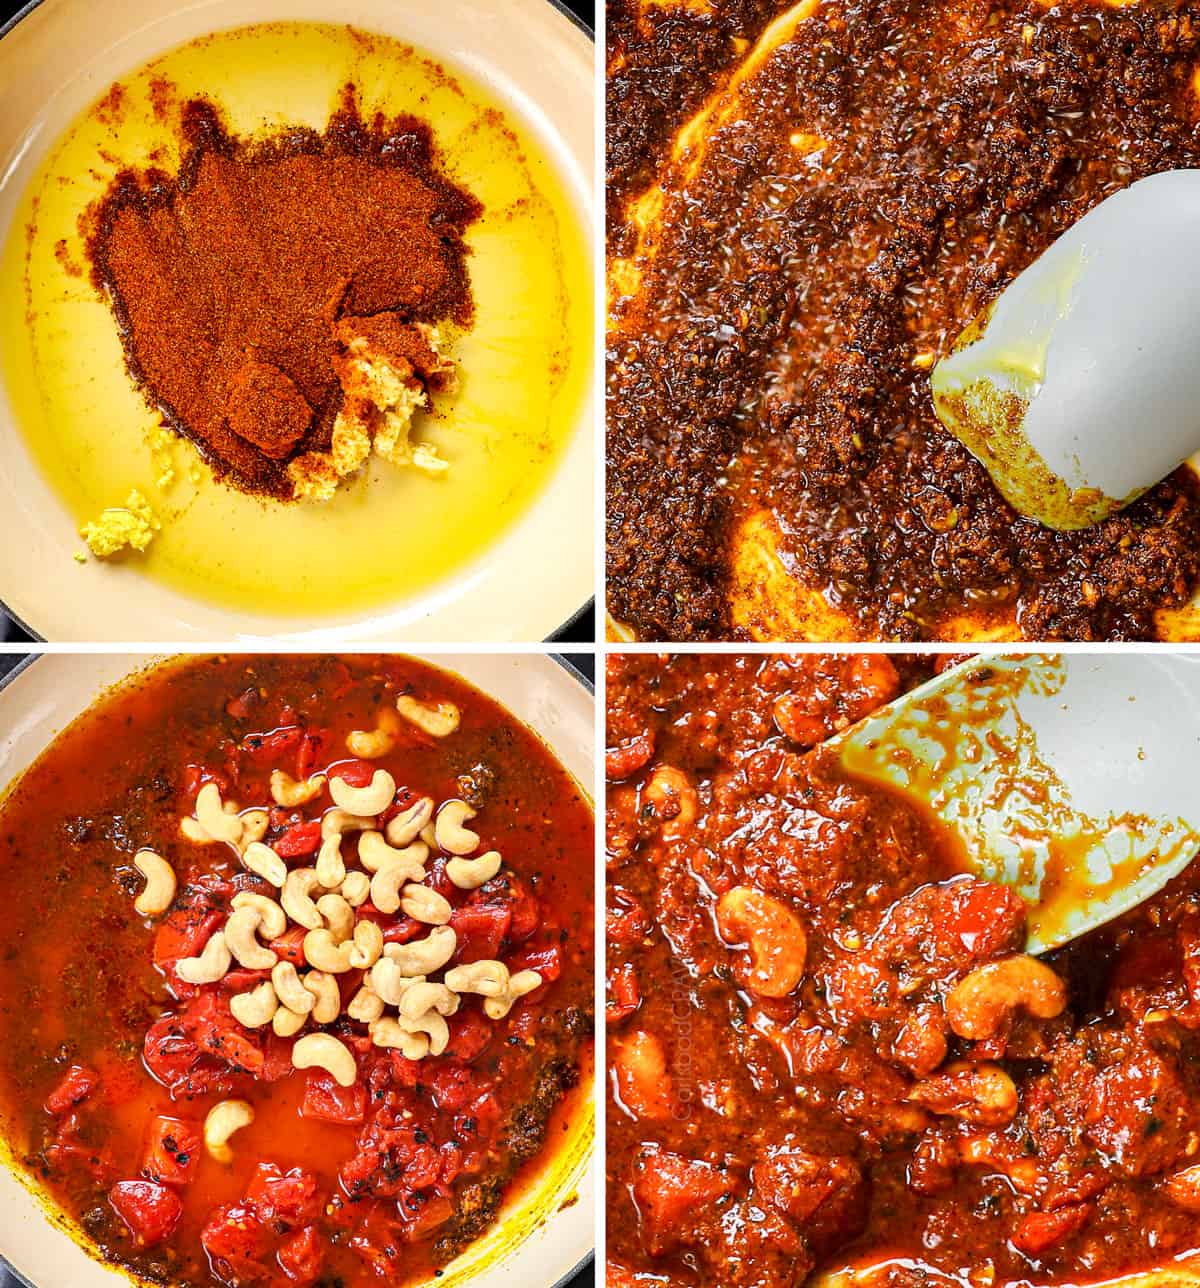 a collage showing how to make best butter chicken recipe by melting ghee and sautéing butter, garlic, ginger and spices, adding cashews and tomatoes and simmering 